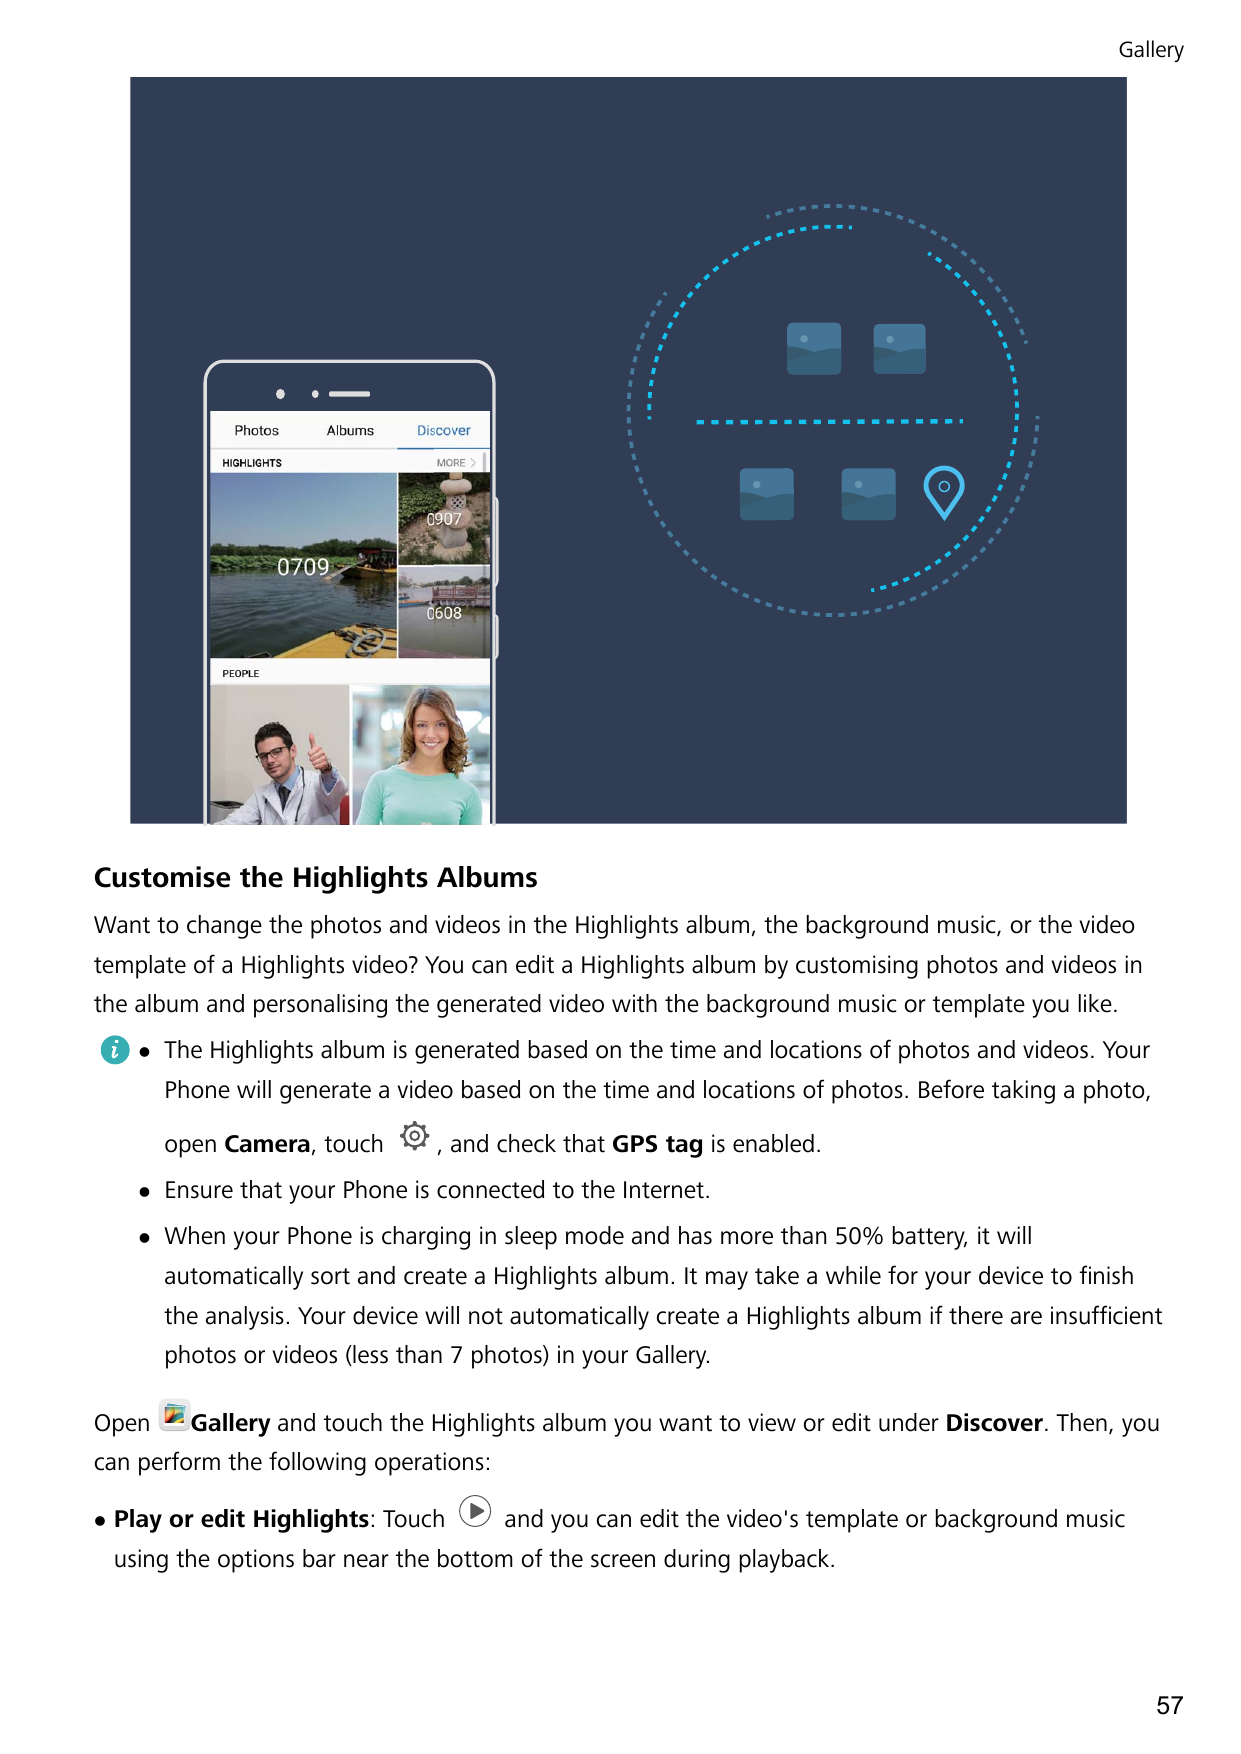 GalleryCustomise the Highlights AlbumsWant to change the photos and videos in the Highlights album, the background music, or the